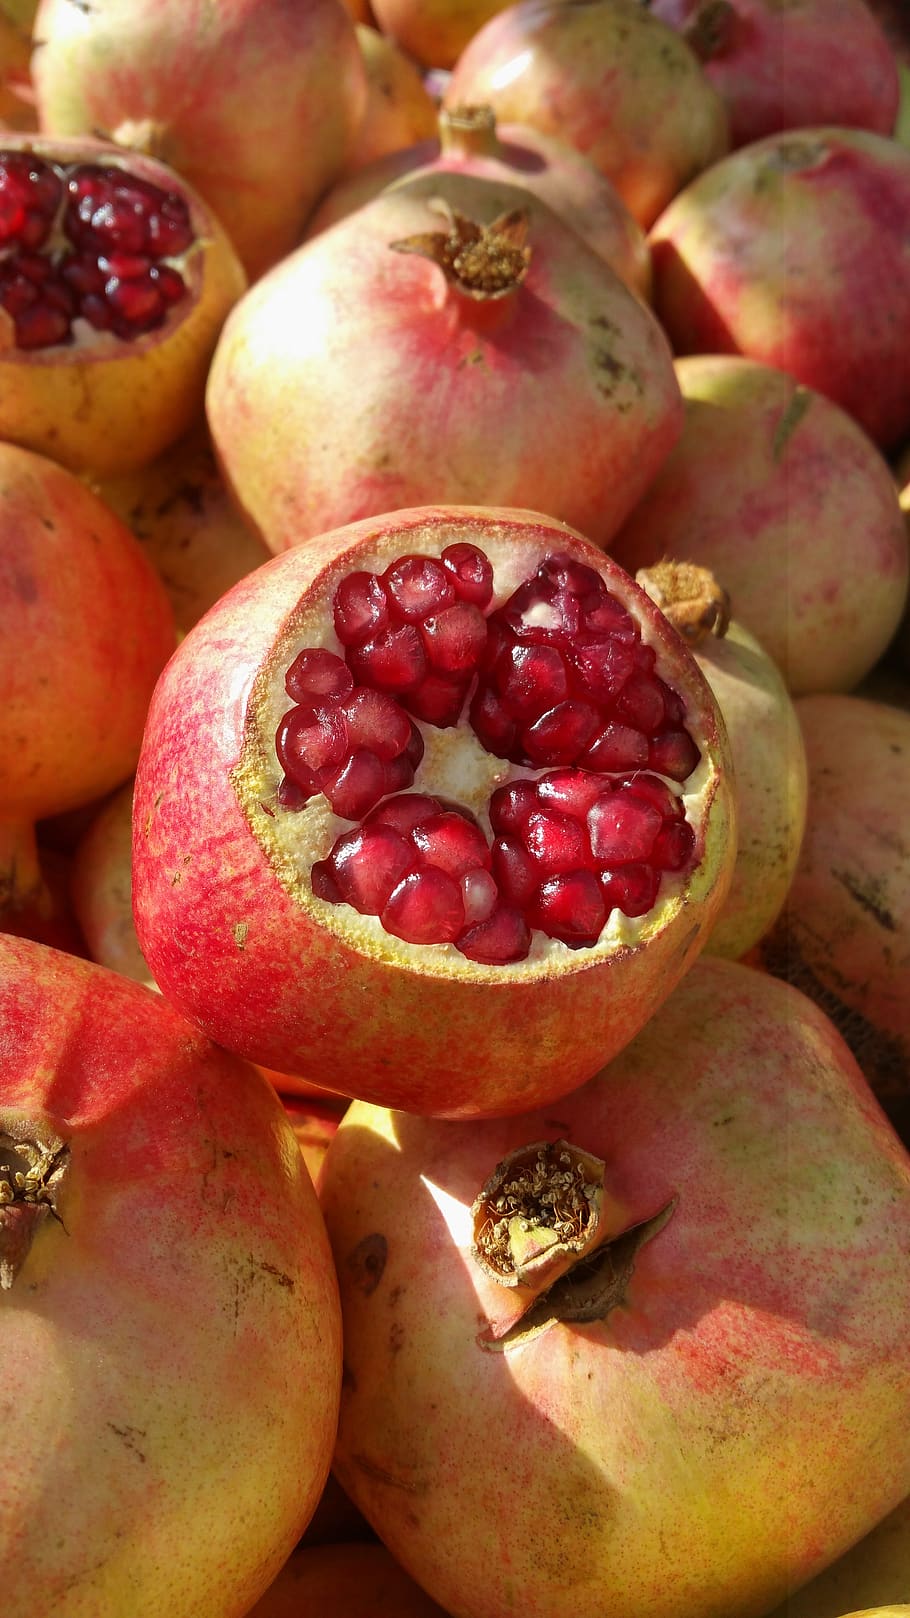 yemen, pomegranate, fruit, food, healthy, red, juicy, food and drink, healthy eating, wellbeing